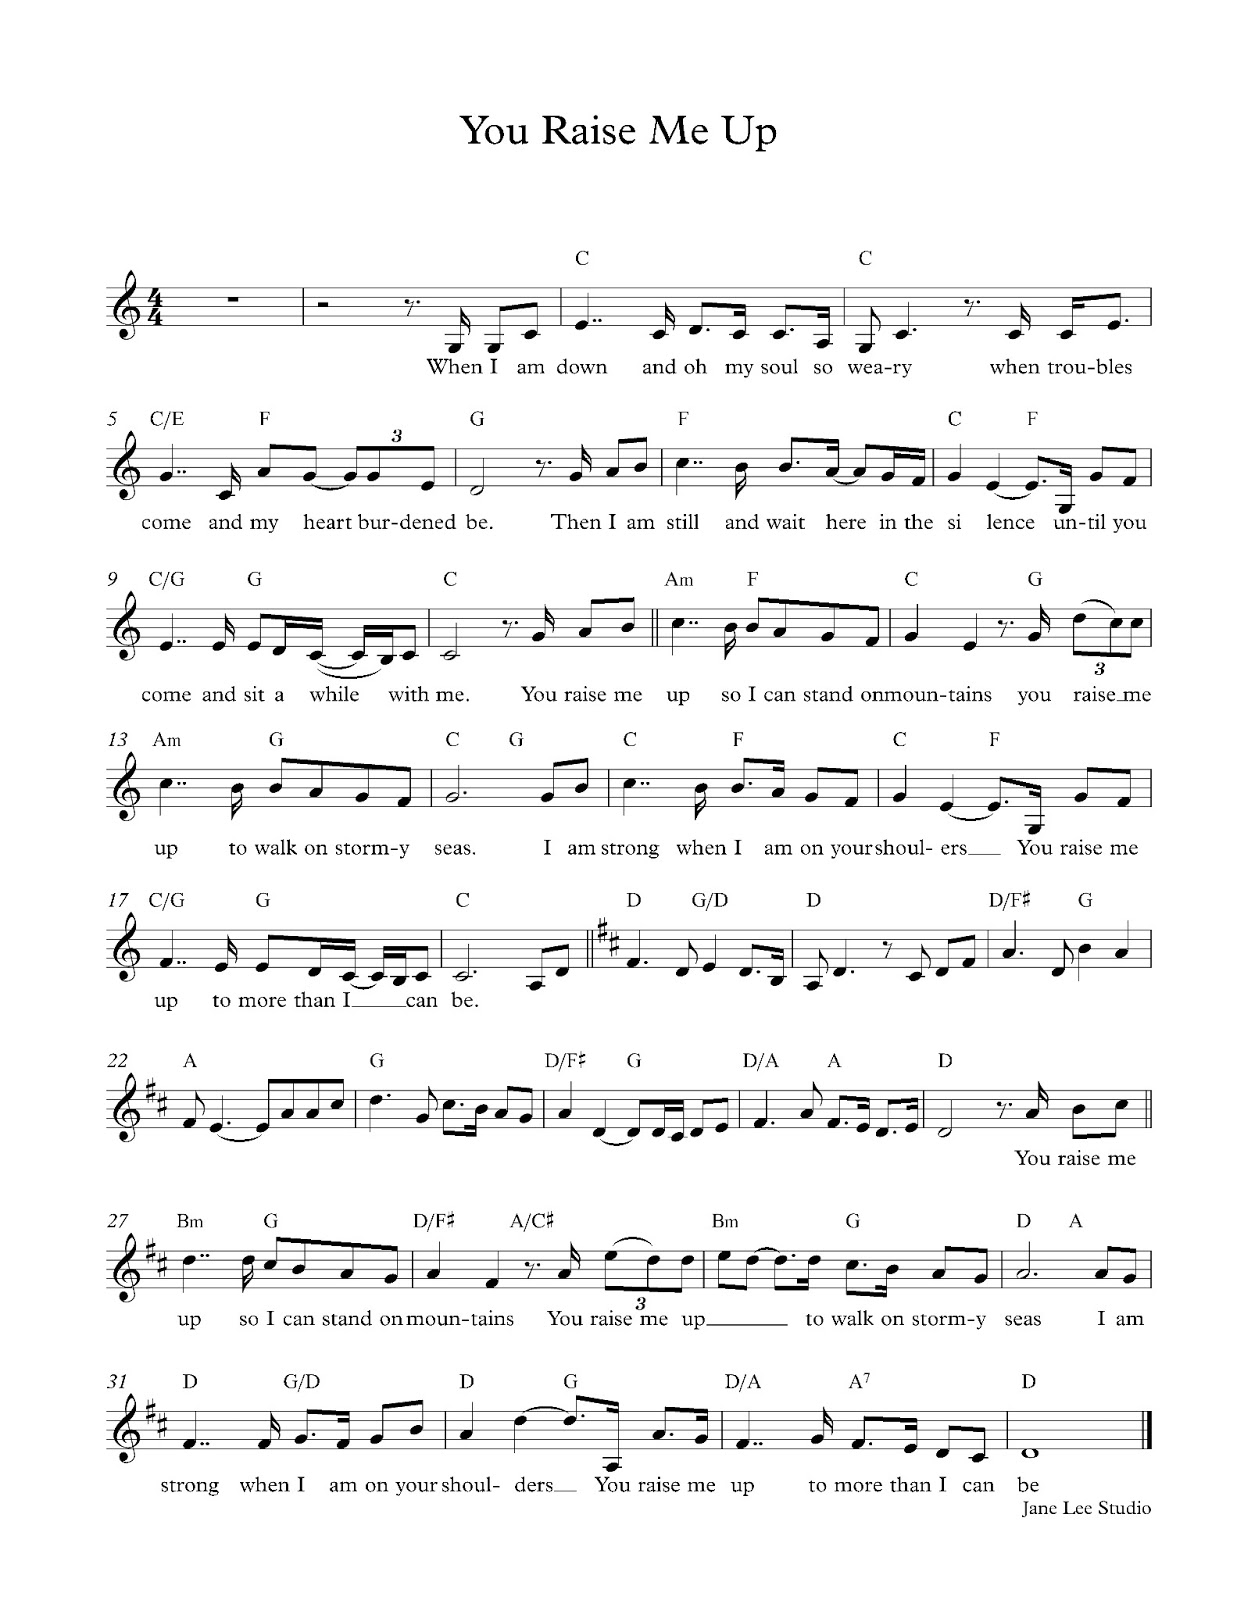 ripple-thoughts-you-raise-me-up-violin-sheet